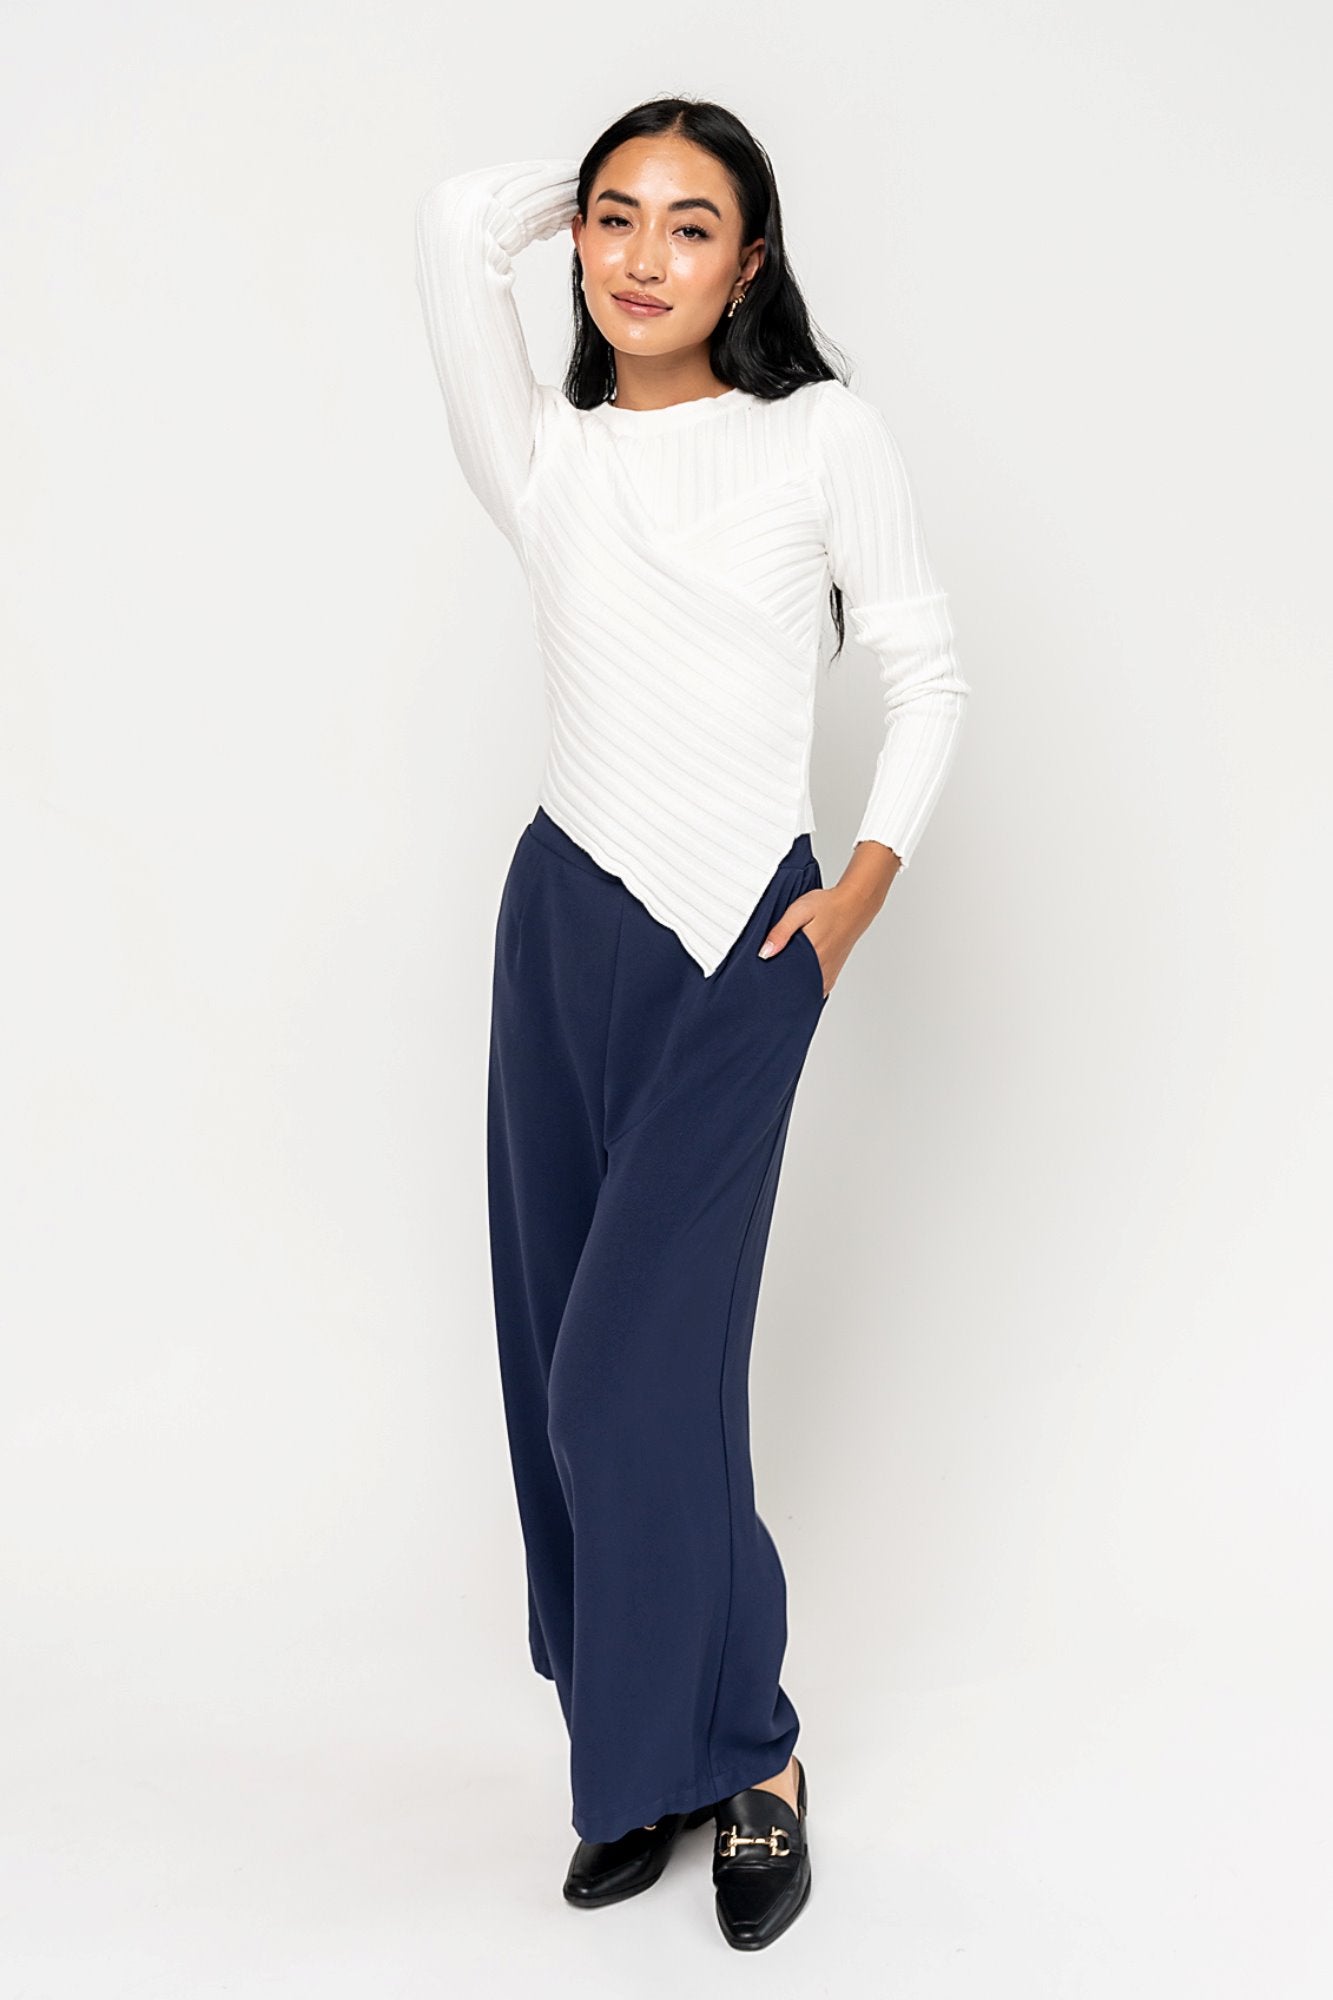 Jovie Pant in Navy (Small-XL) Holley Girl 